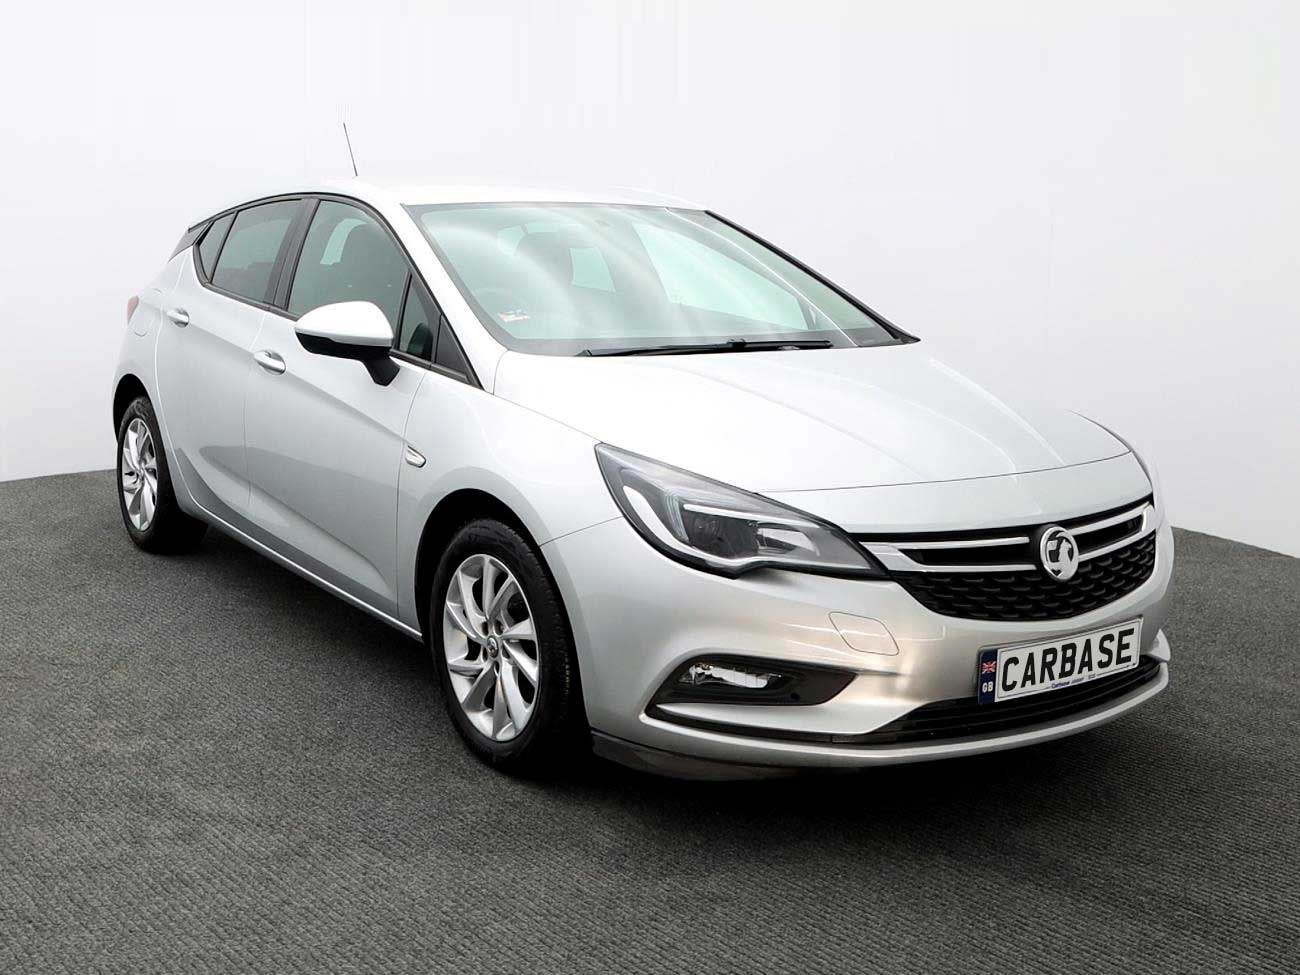 Vauxhall Astra front view in showroom